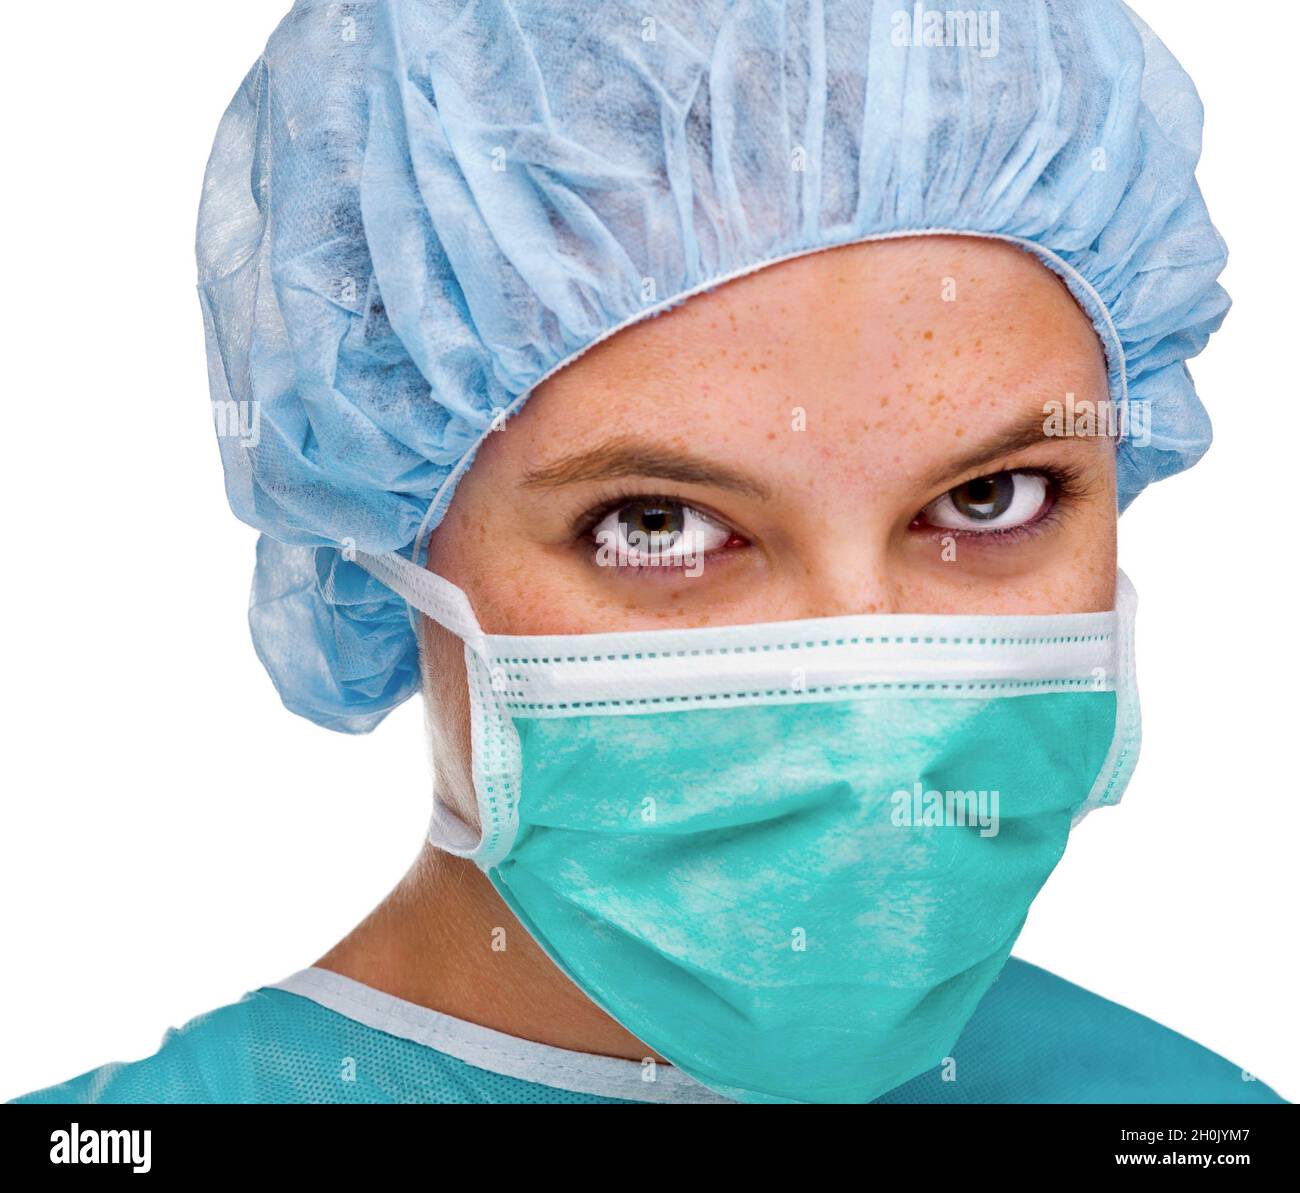 https://c8.alamy.com/comp/2H0JYM7/young-operating-room-nurse-with-surgical-mask-and-nurses-cap-2H0JYM7.jpg